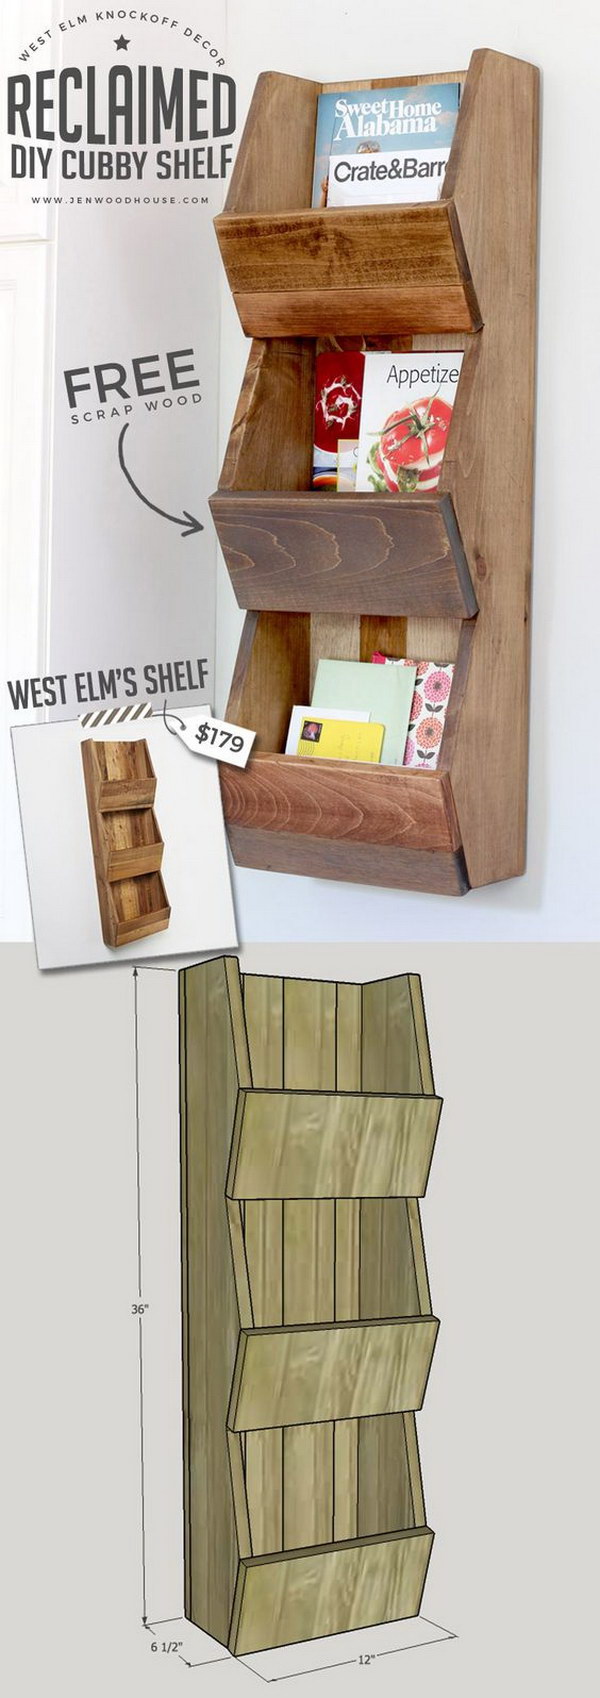 West Elm Knockoff, Reclaimed Cubby Shelf. 